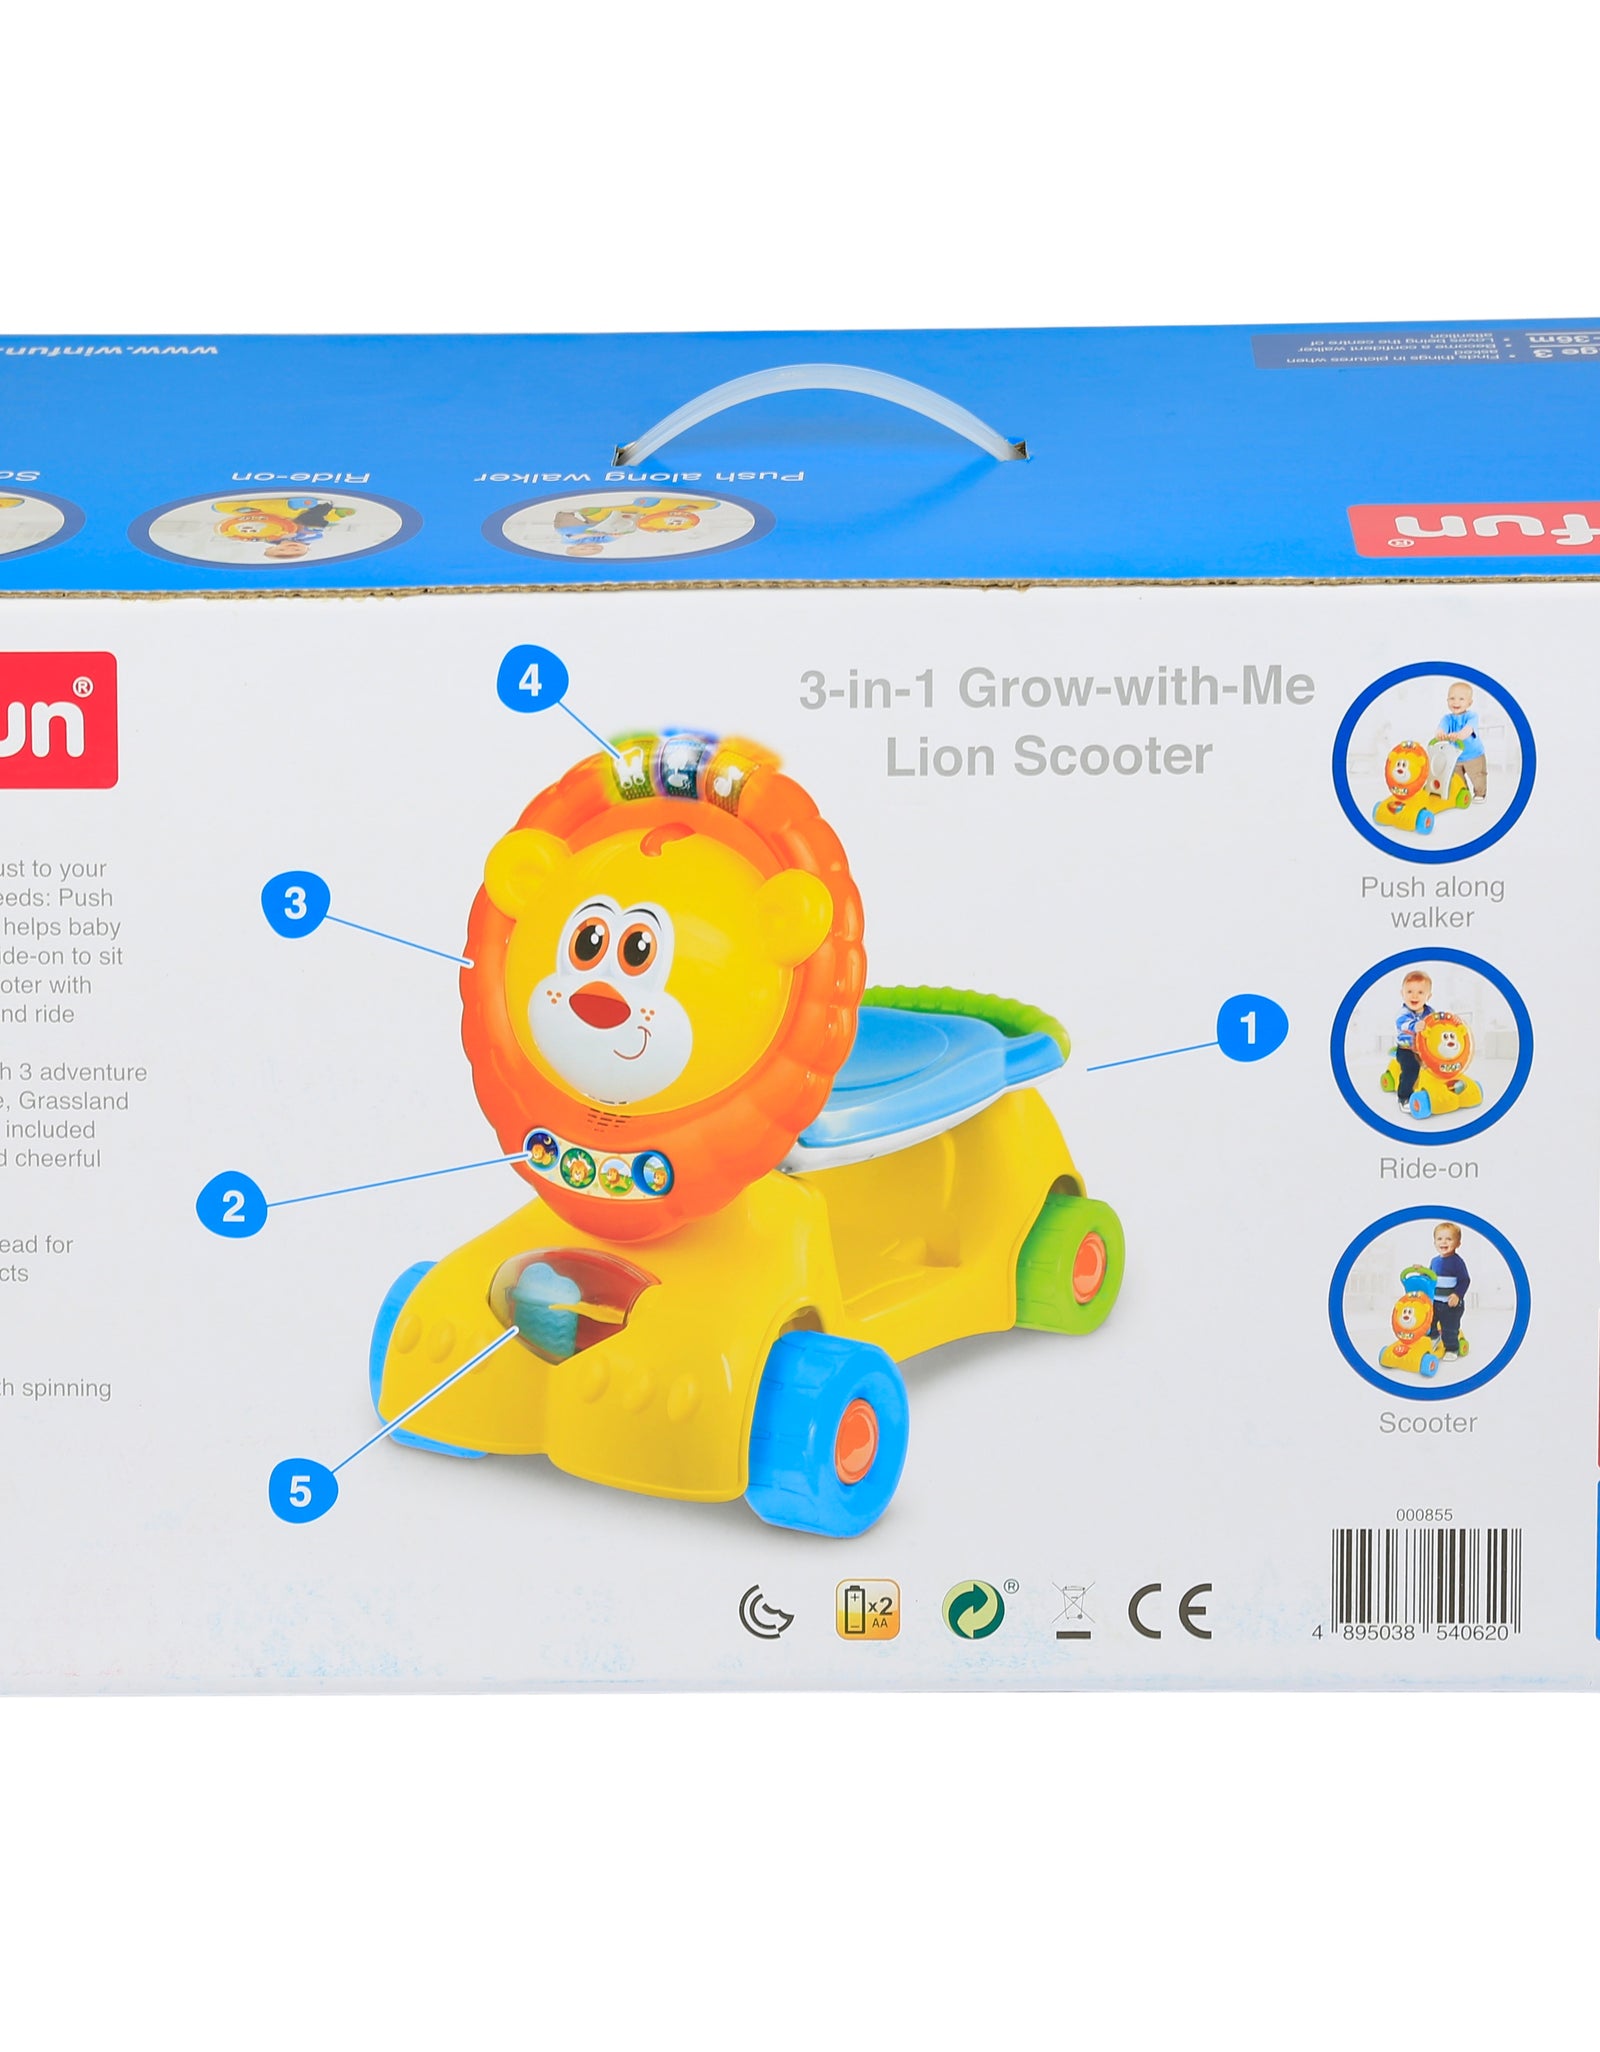 Winfun - 3-in-1 Grow-with-Me Lion Scooter